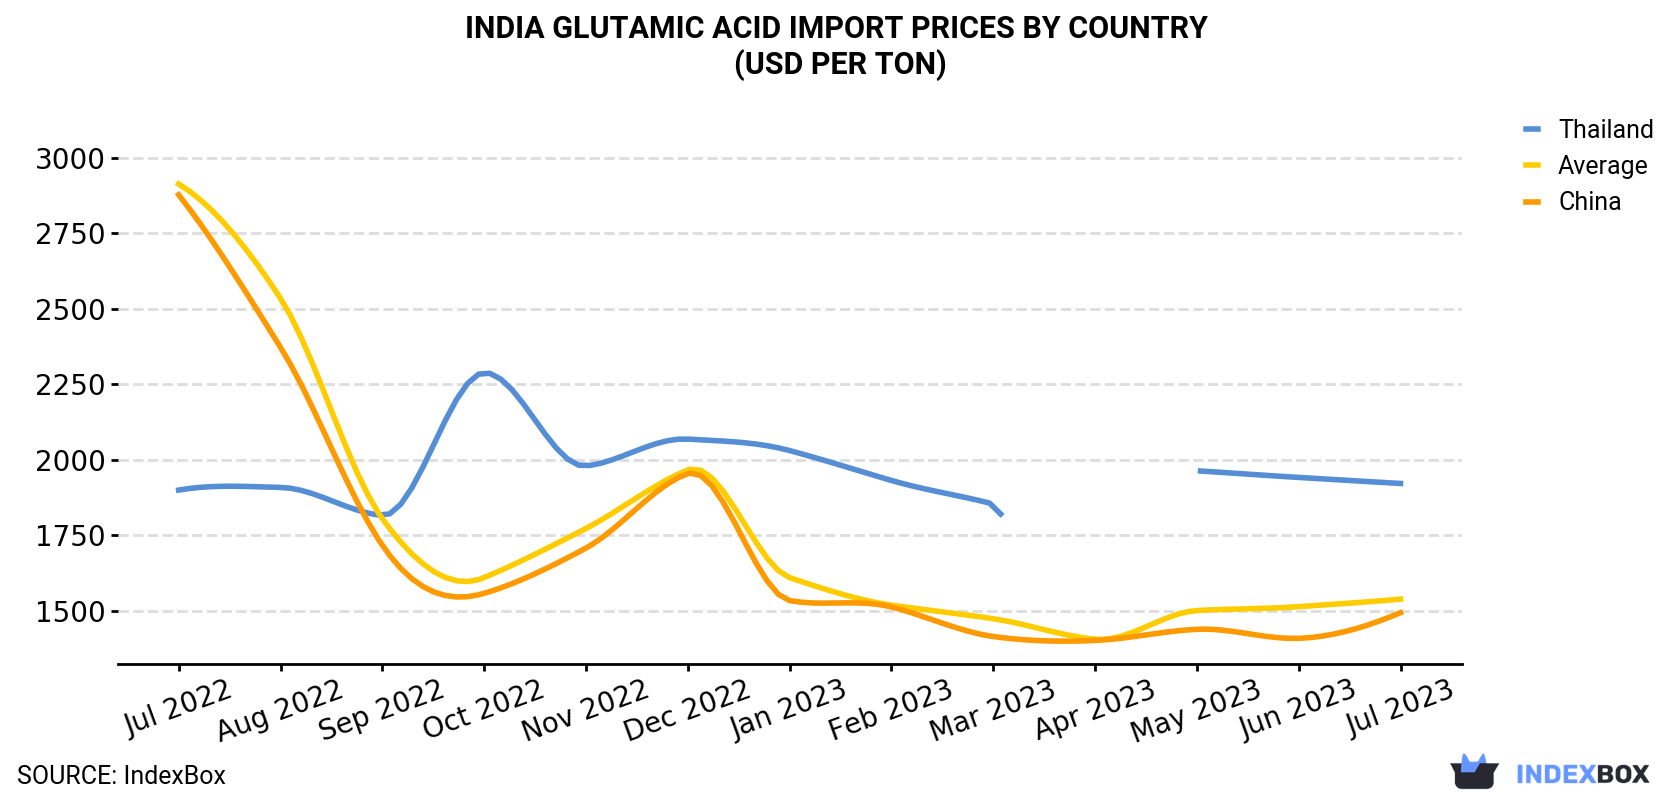 India Glutamic Acid Import Prices By Country (USD Per Ton)